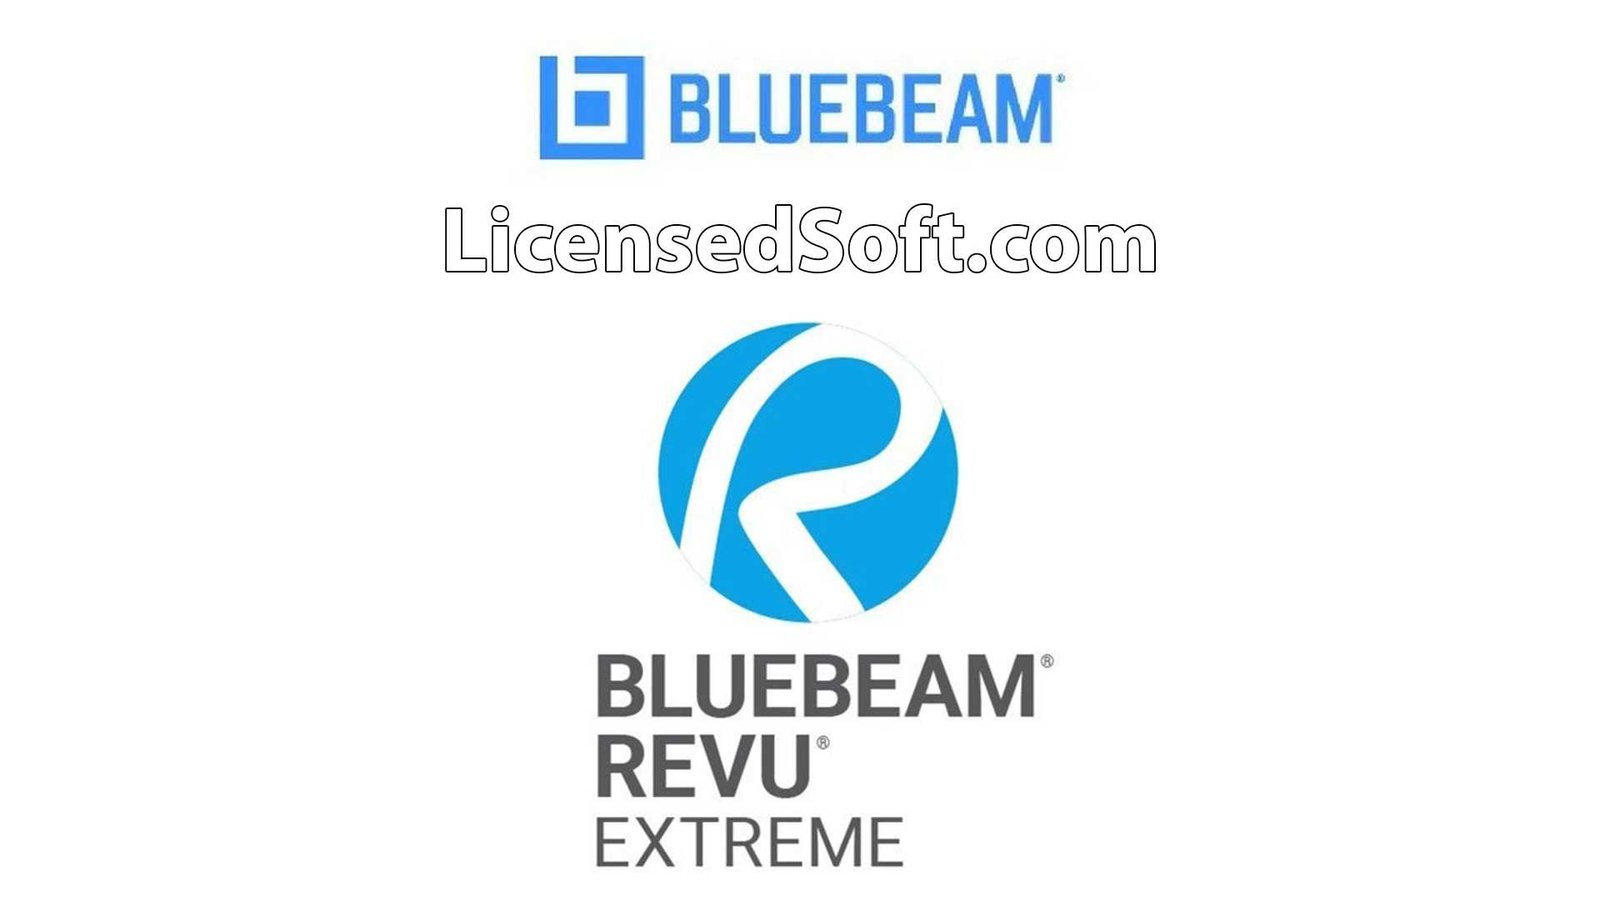 Bluebeam Revu 21.0.45 Full Version Cover Image By LicensedSoft